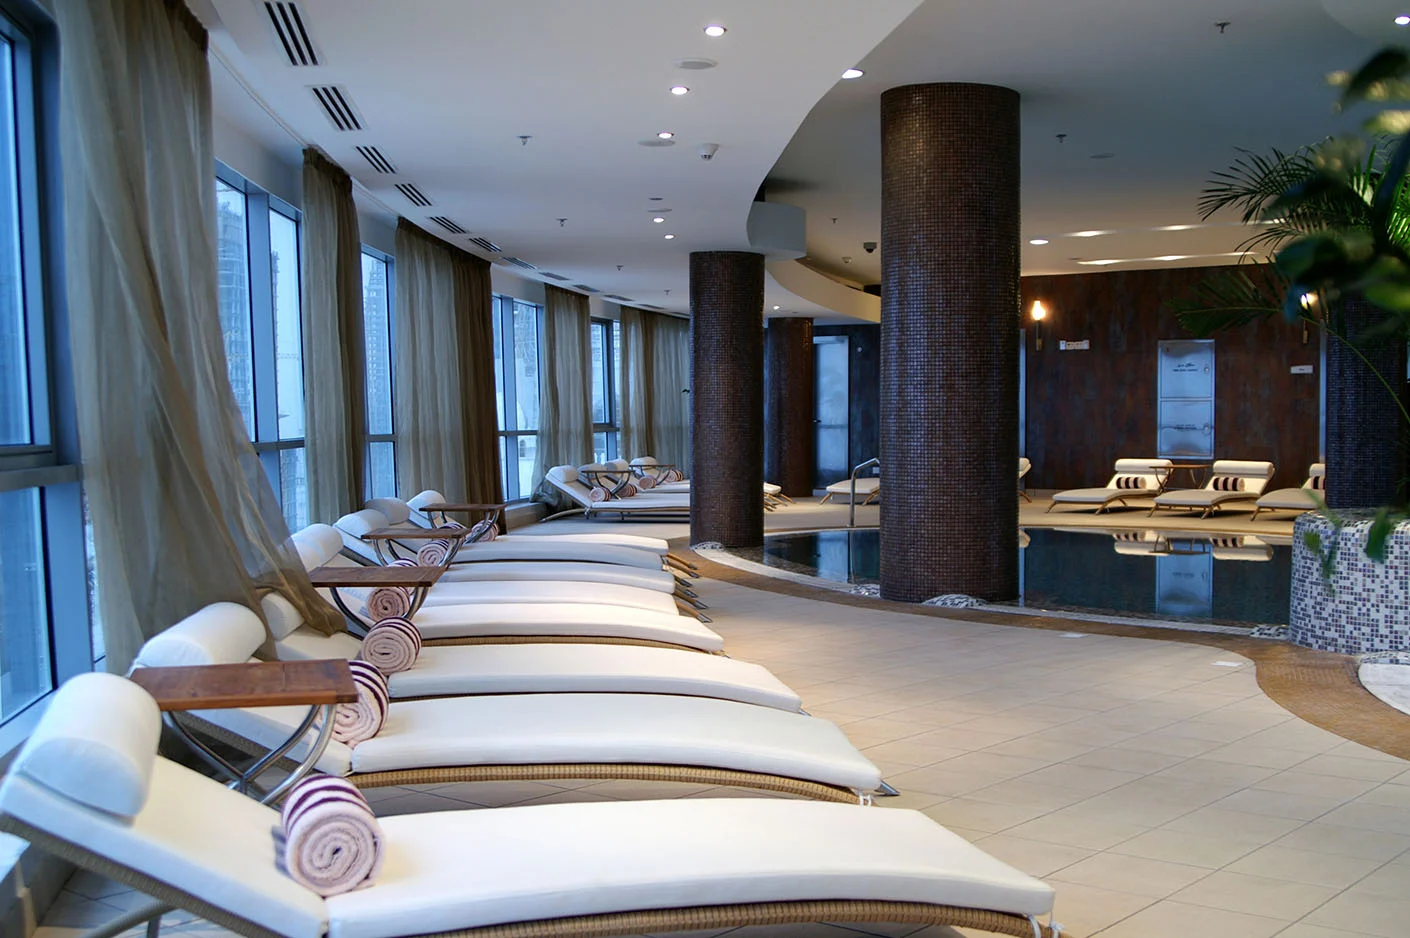 Unwinding In Style: The Spa And Wellness Offerings At Be Hotel